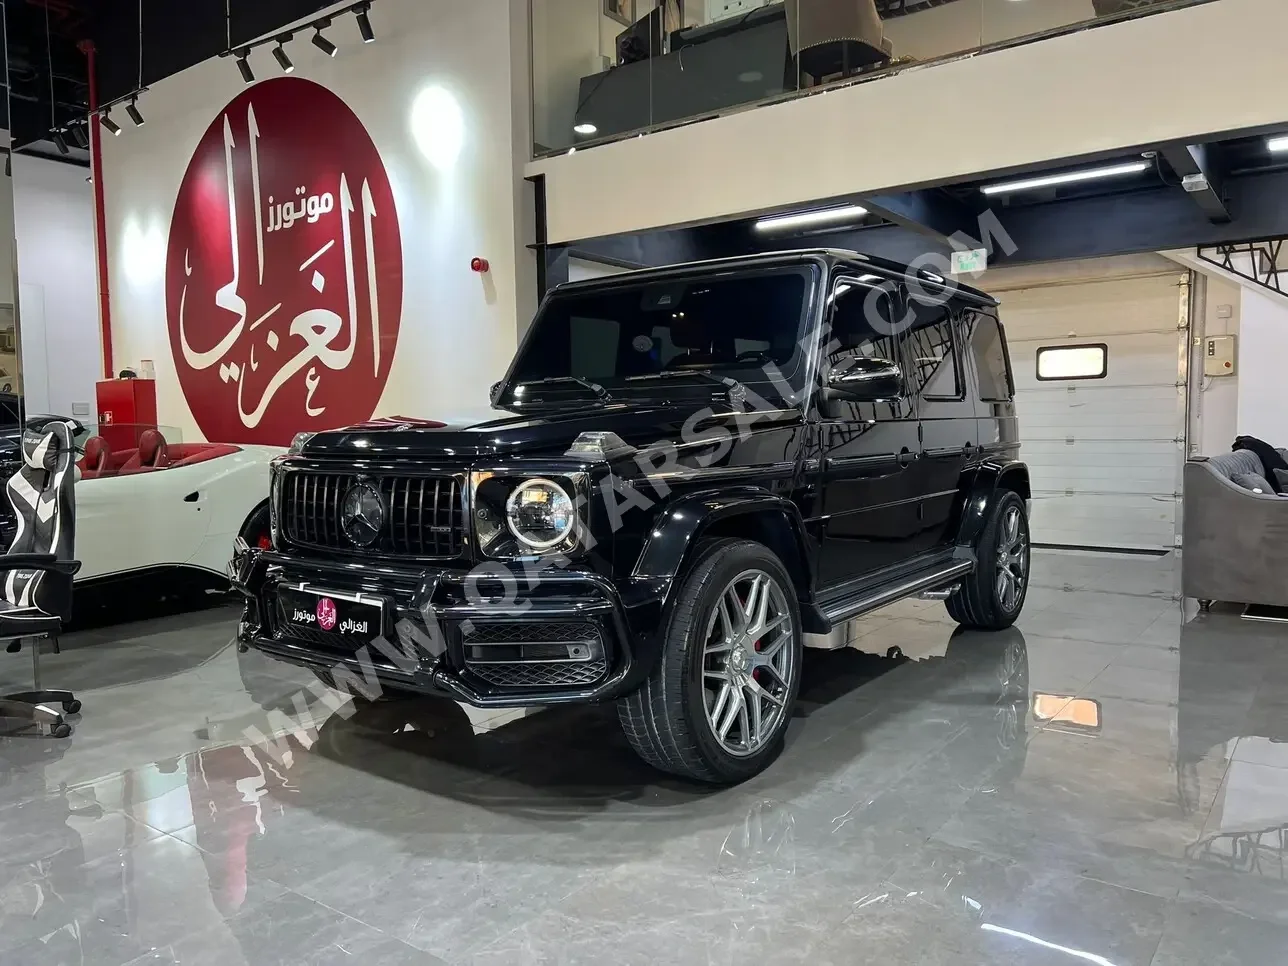  Mercedes-Benz  G-Class  63 AMG  2019  Automatic  84,000 Km  8 Cylinder  Four Wheel Drive (4WD)  SUV  Black  With Warranty